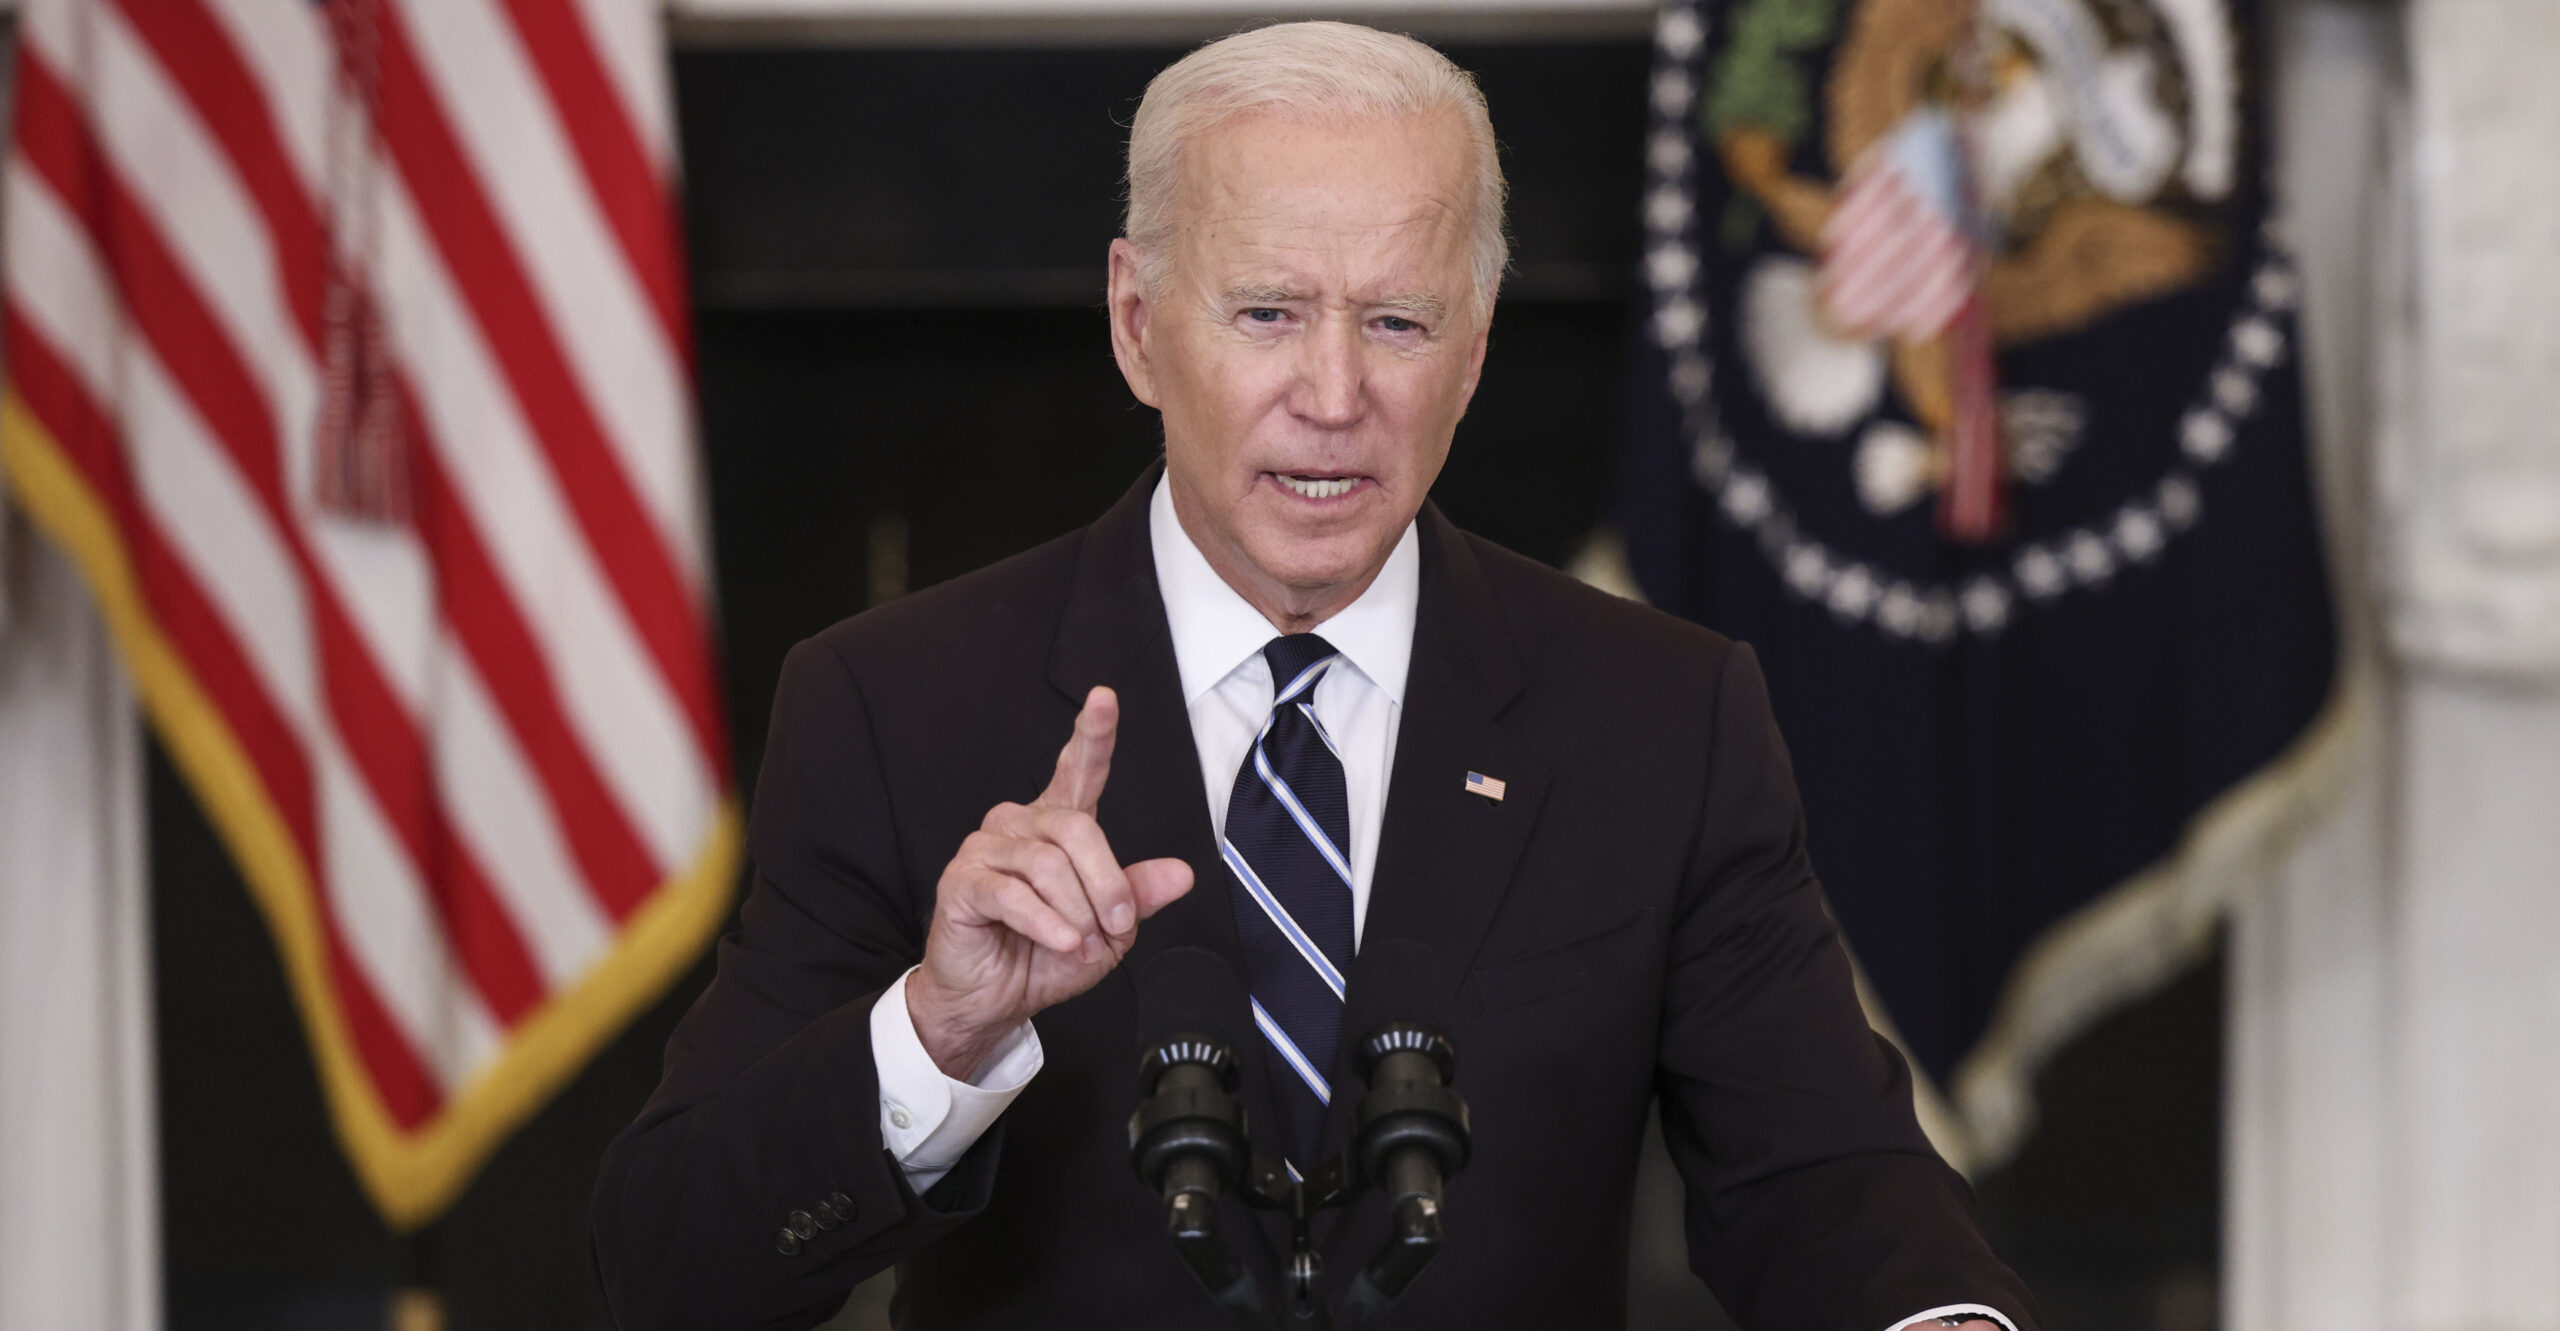 Biden Mandates COVID-19 Vaccines for Large Companies as Well as Federal Employees